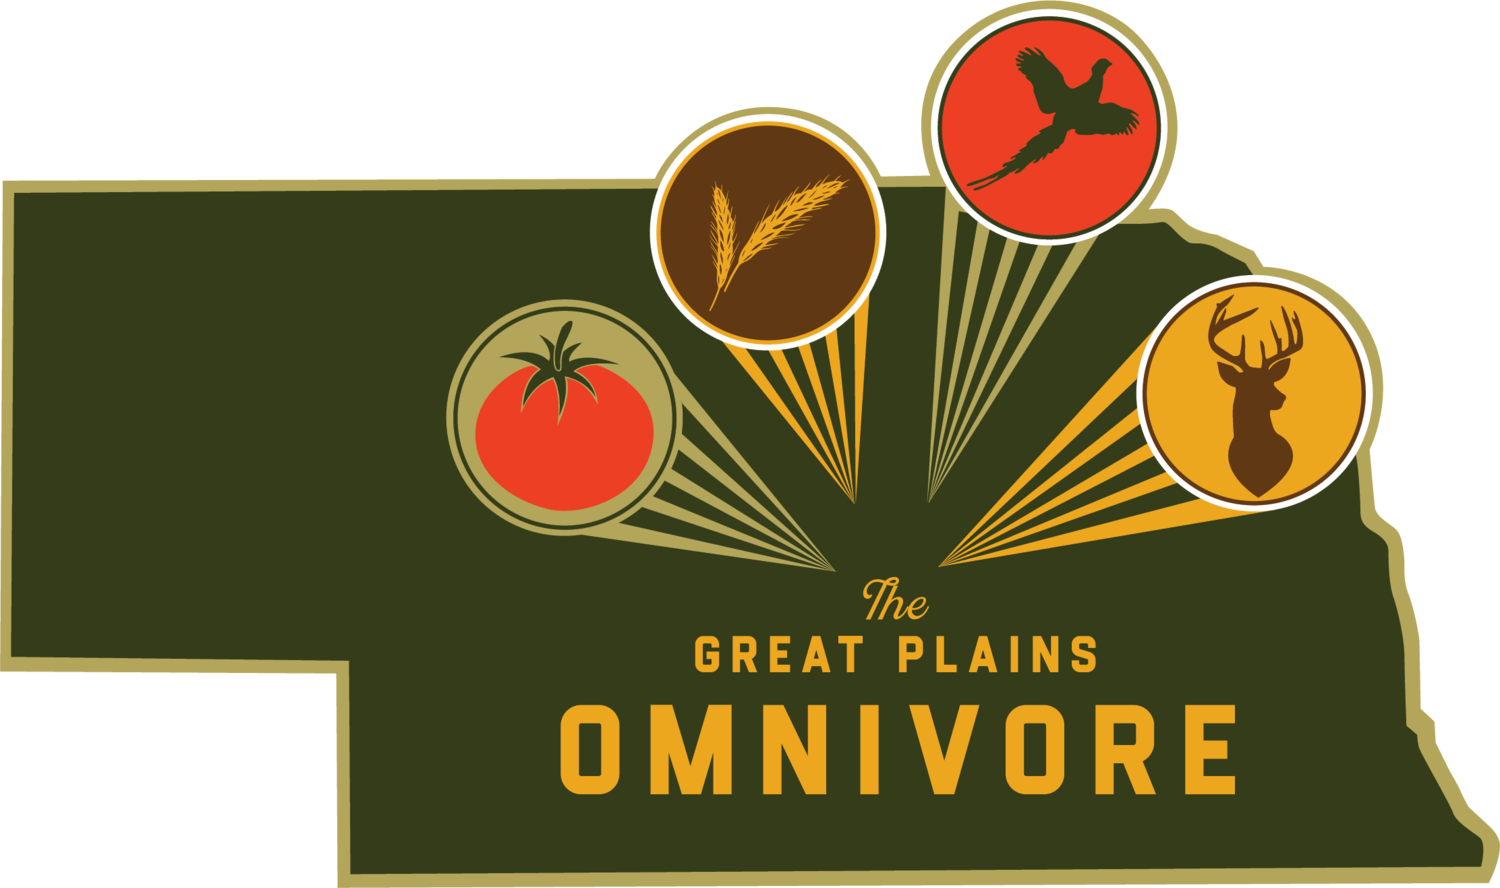 The Great Plains Omnivore